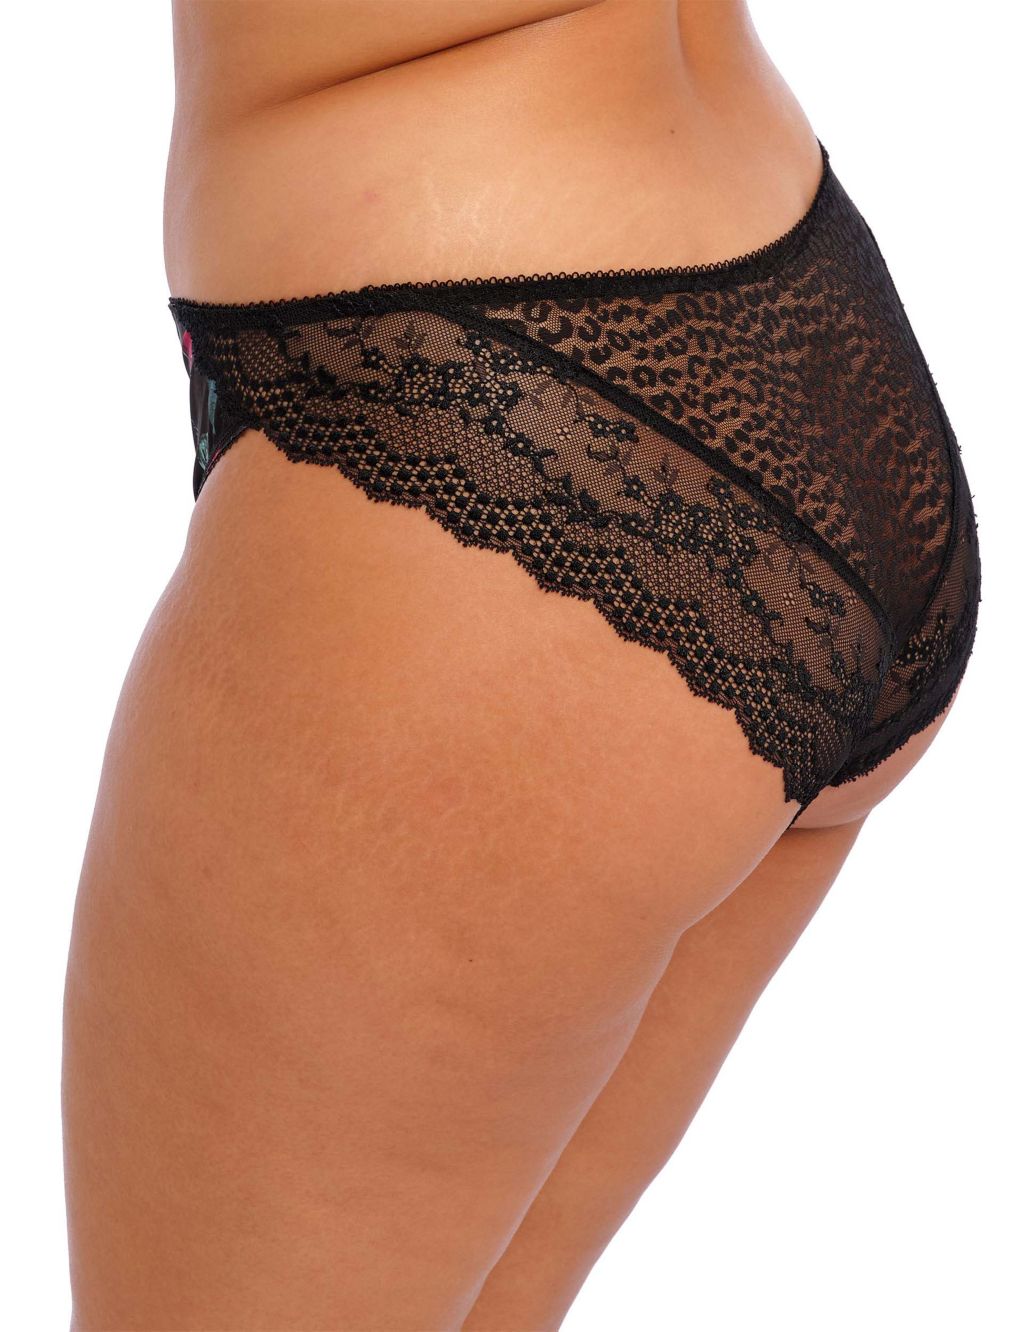 Lucie Floral Brazilian Knickers image 4